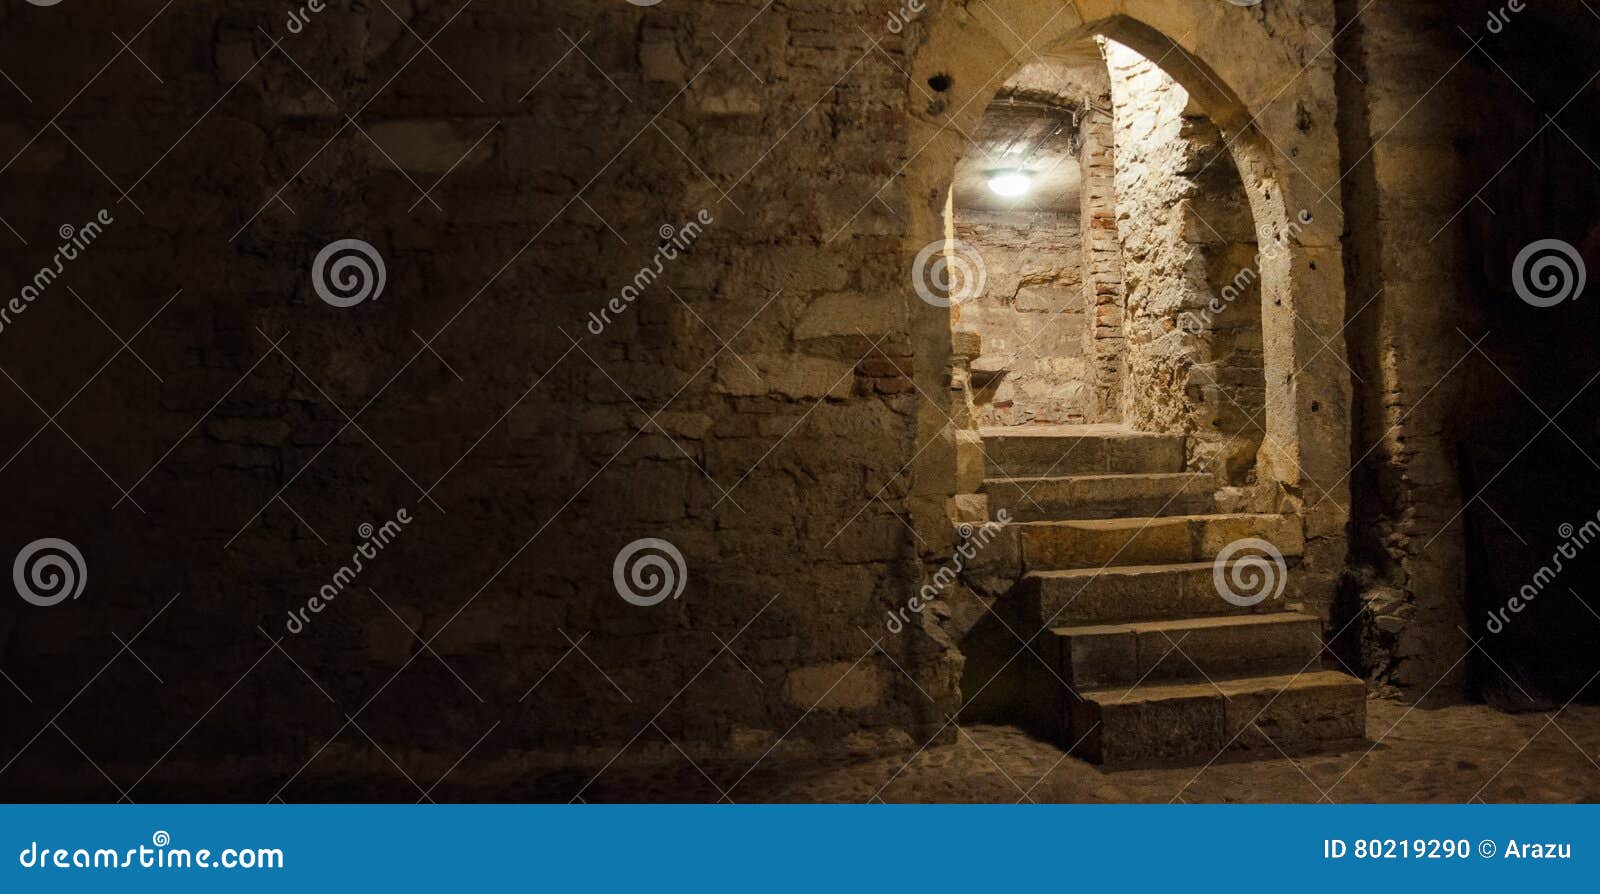 the-entrance-gate-into-the-underground-area-of-the-old-town-square-of